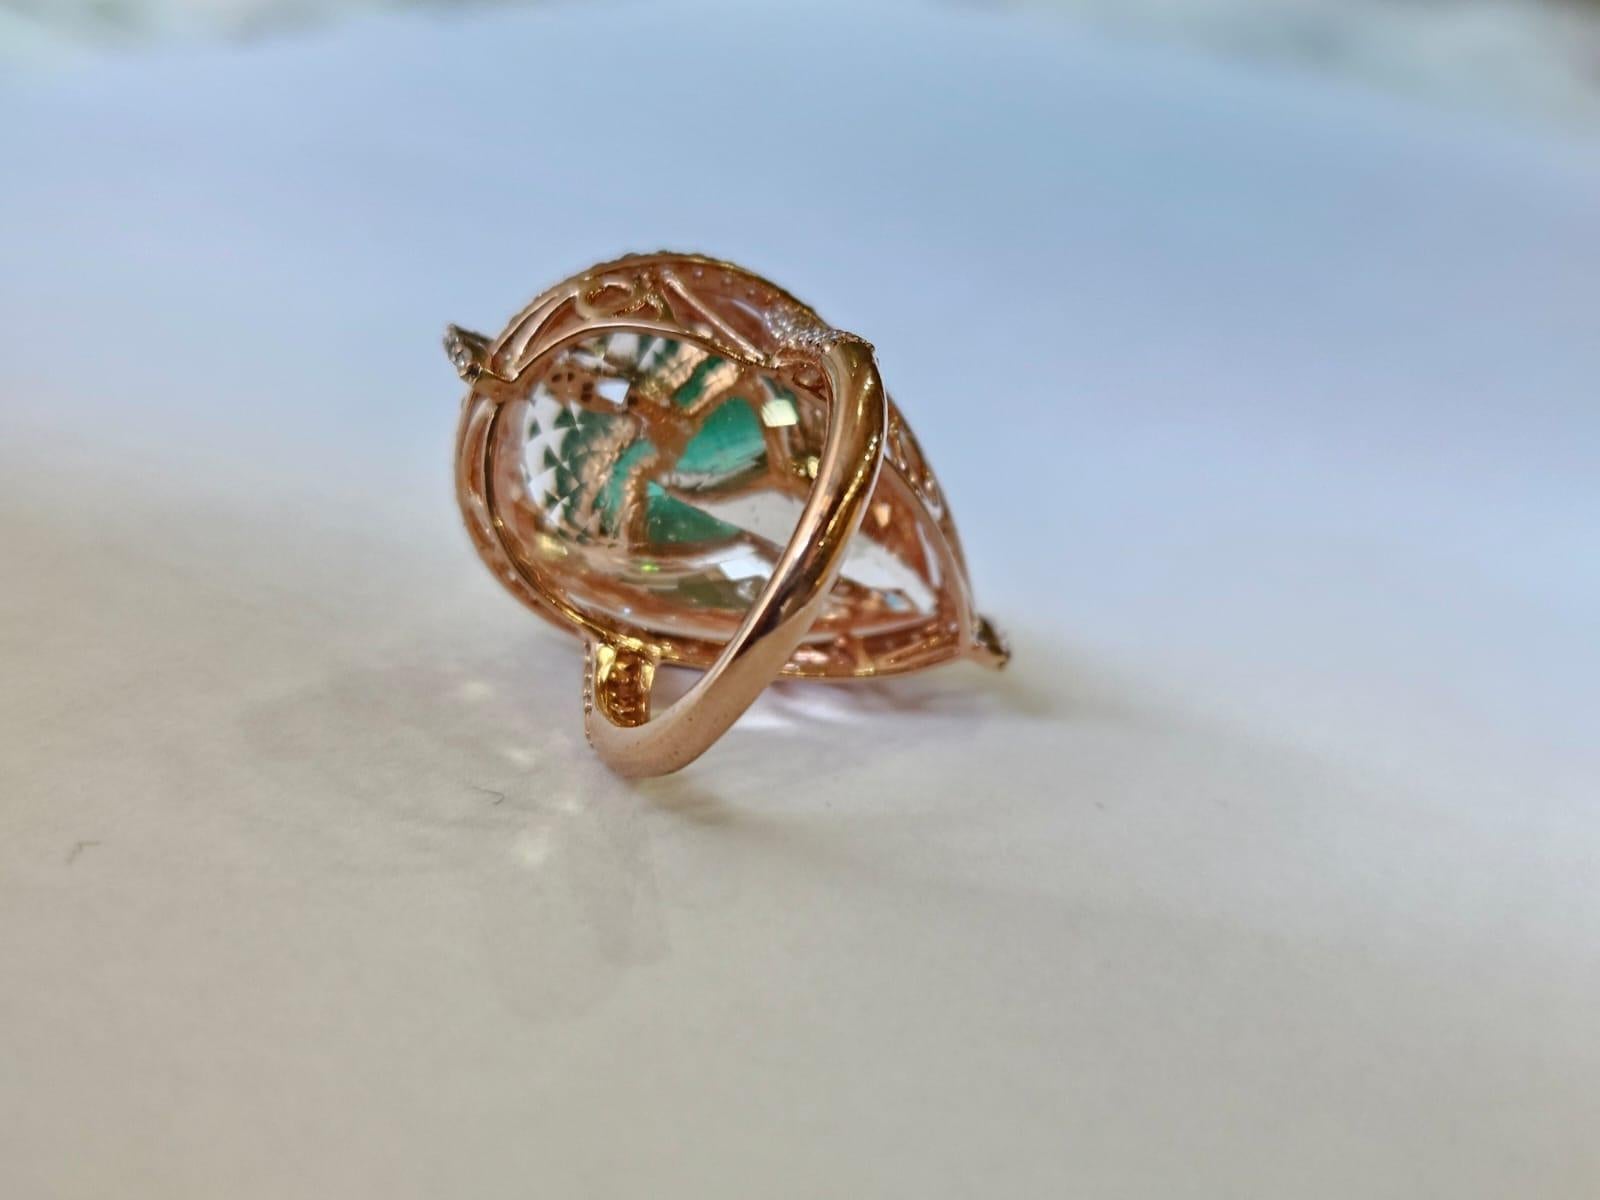 Modern Set in 18K Gold, 21.25 carats Morganite, Zambian Emerald & Diamond Cocktail Ring For Sale